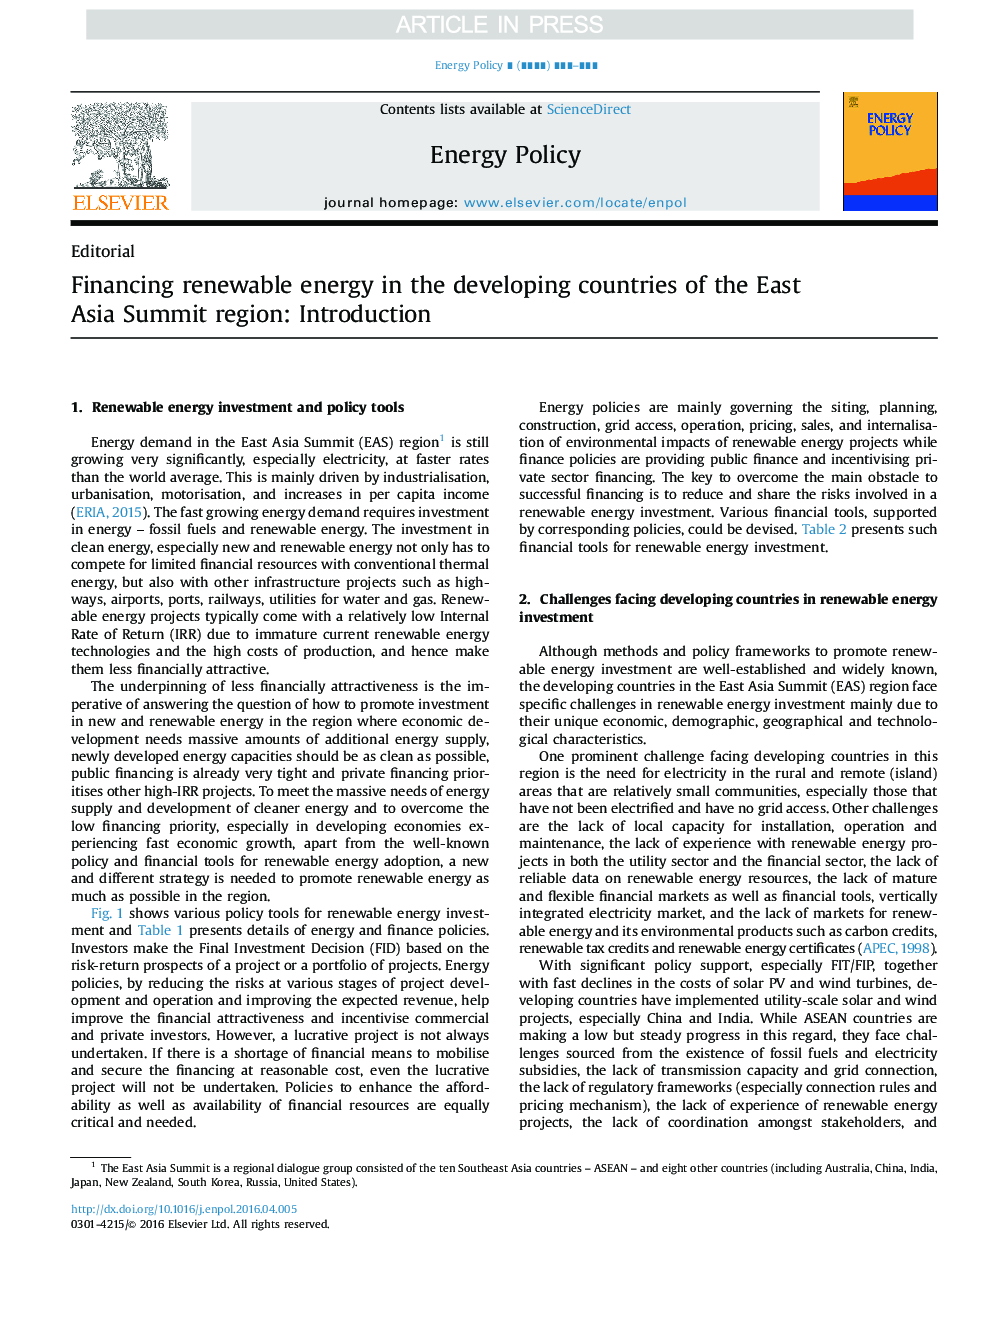 Financing renewable energy in the developing countries of the East Asia Summit region: Introduction